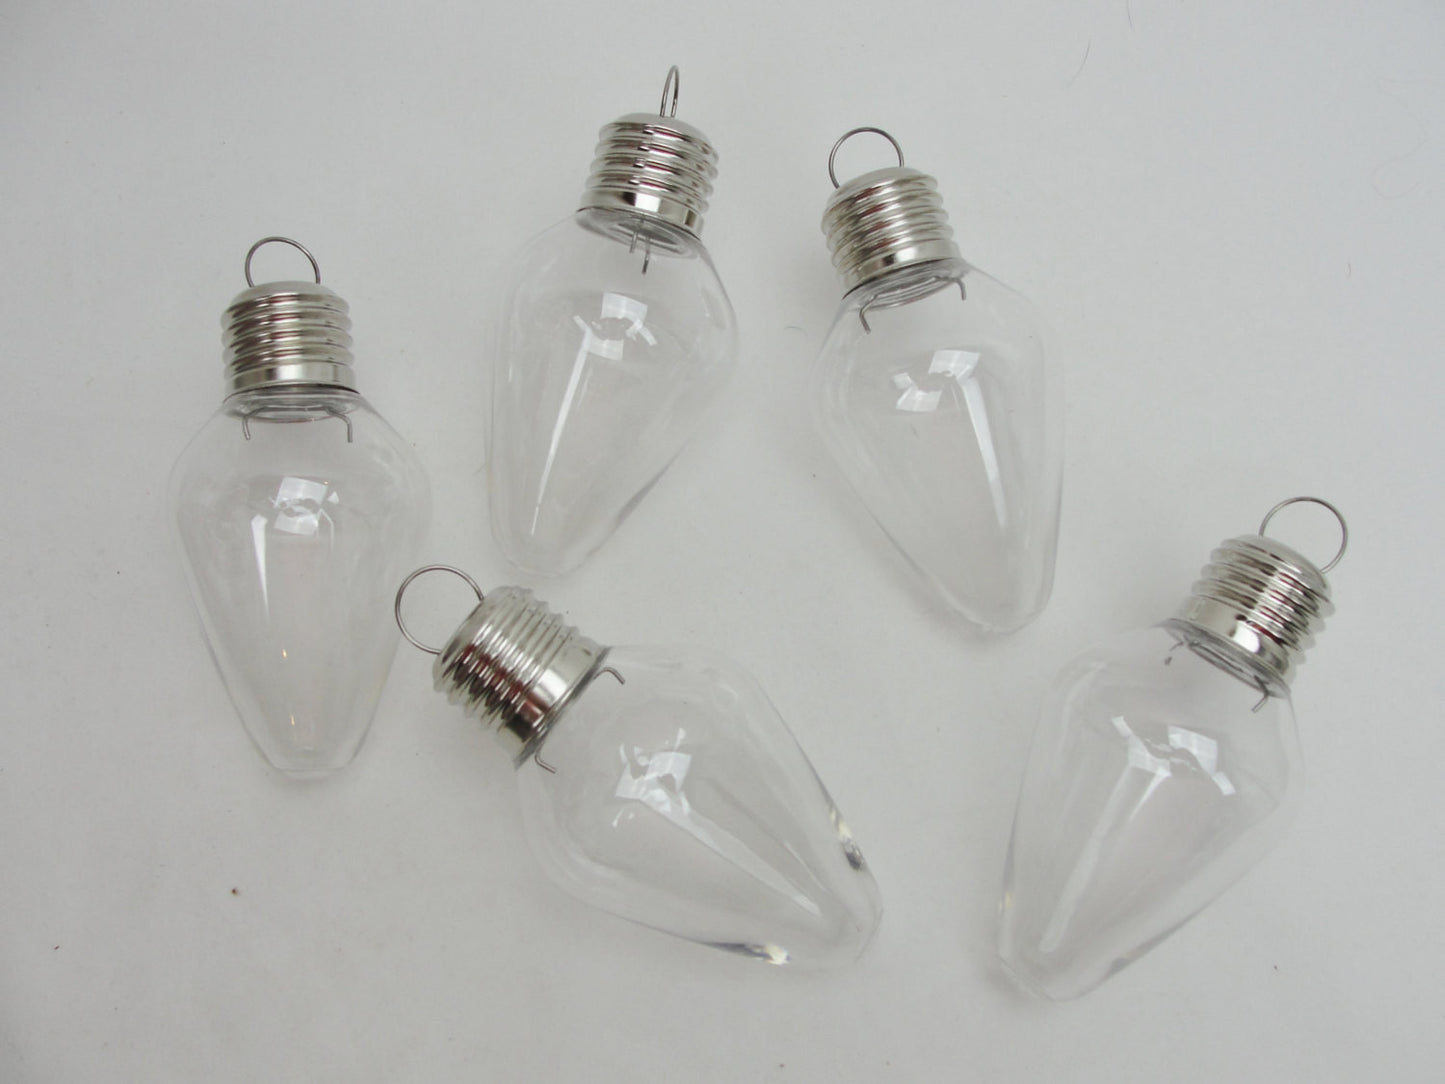 Plastic fillable light bulb shaped ornament set of 5 - General Crafts - Craft Supply House